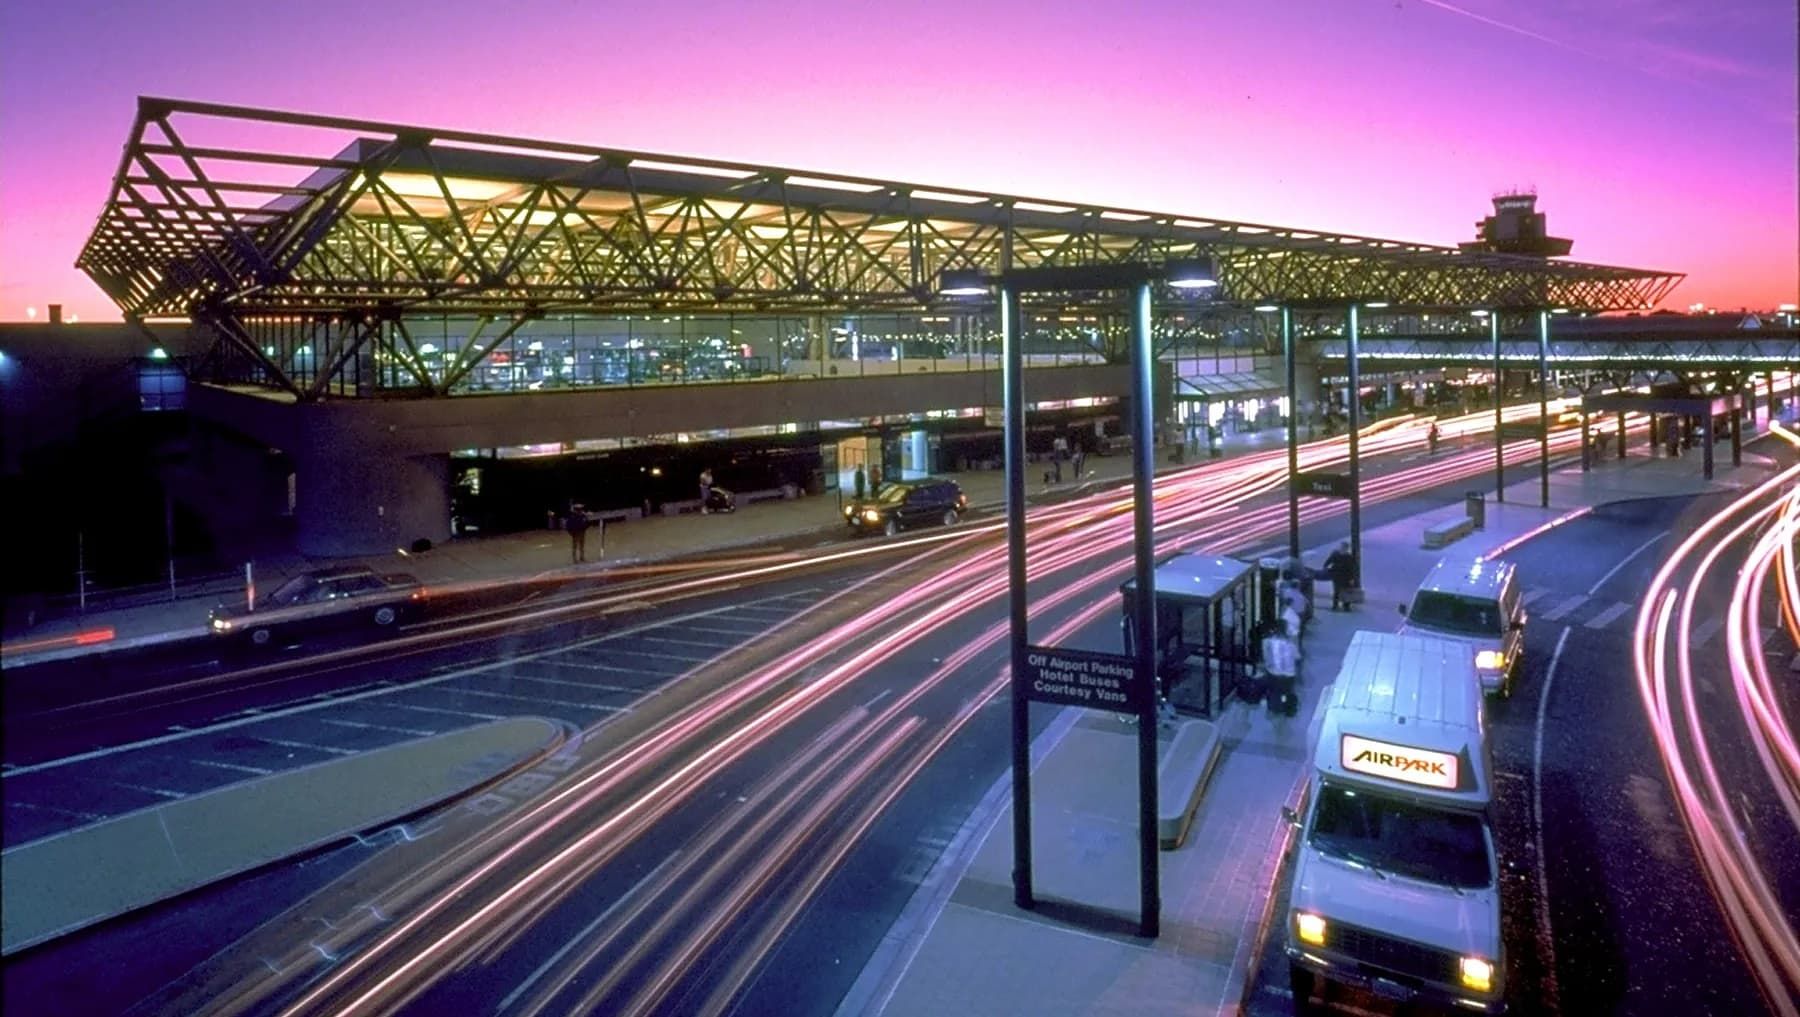 View of the entrance to the Oakland International Airport